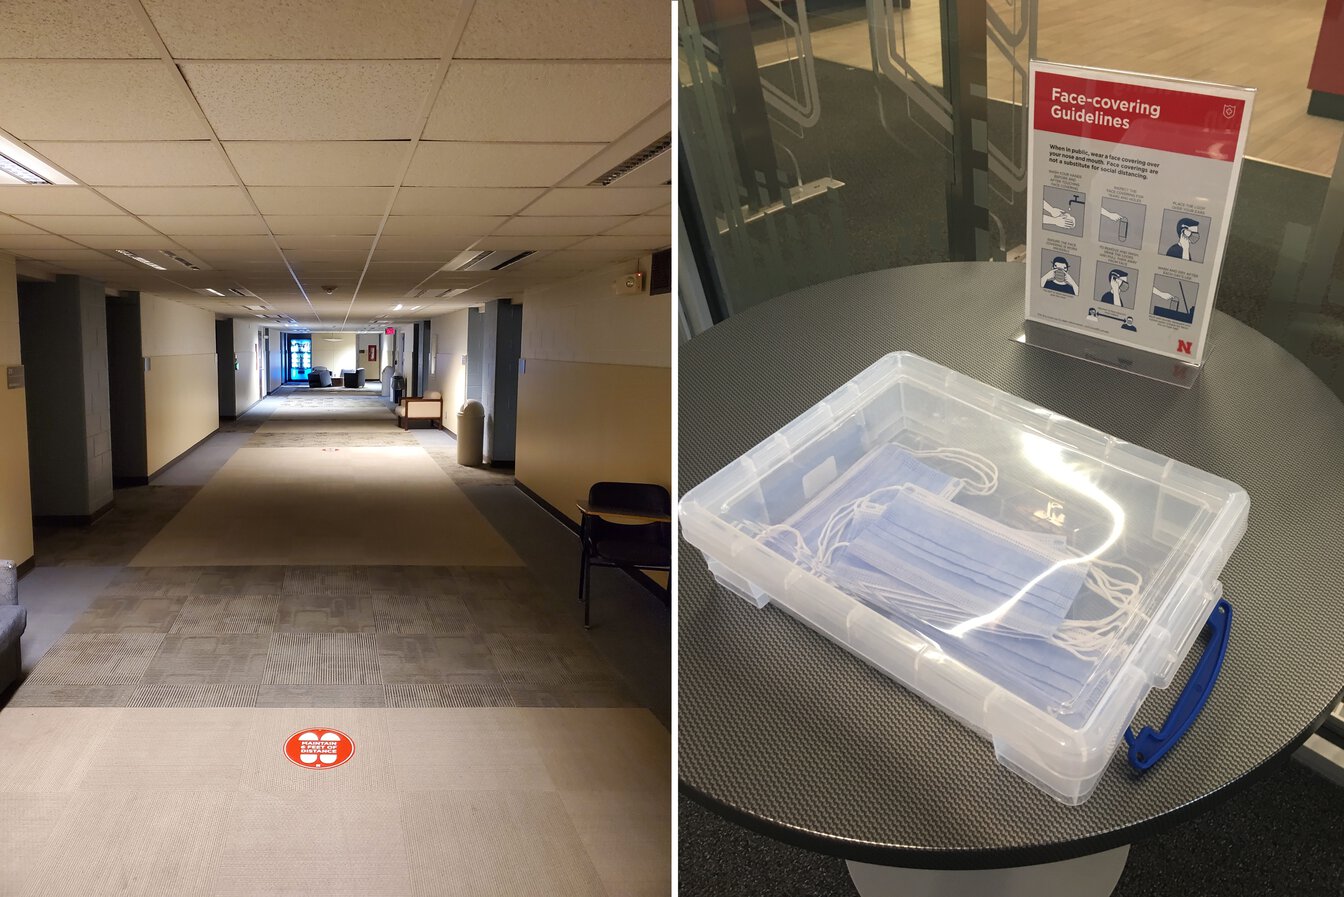 Empty hallway with floor marker for social distancing. Box of facemasks with instructions.